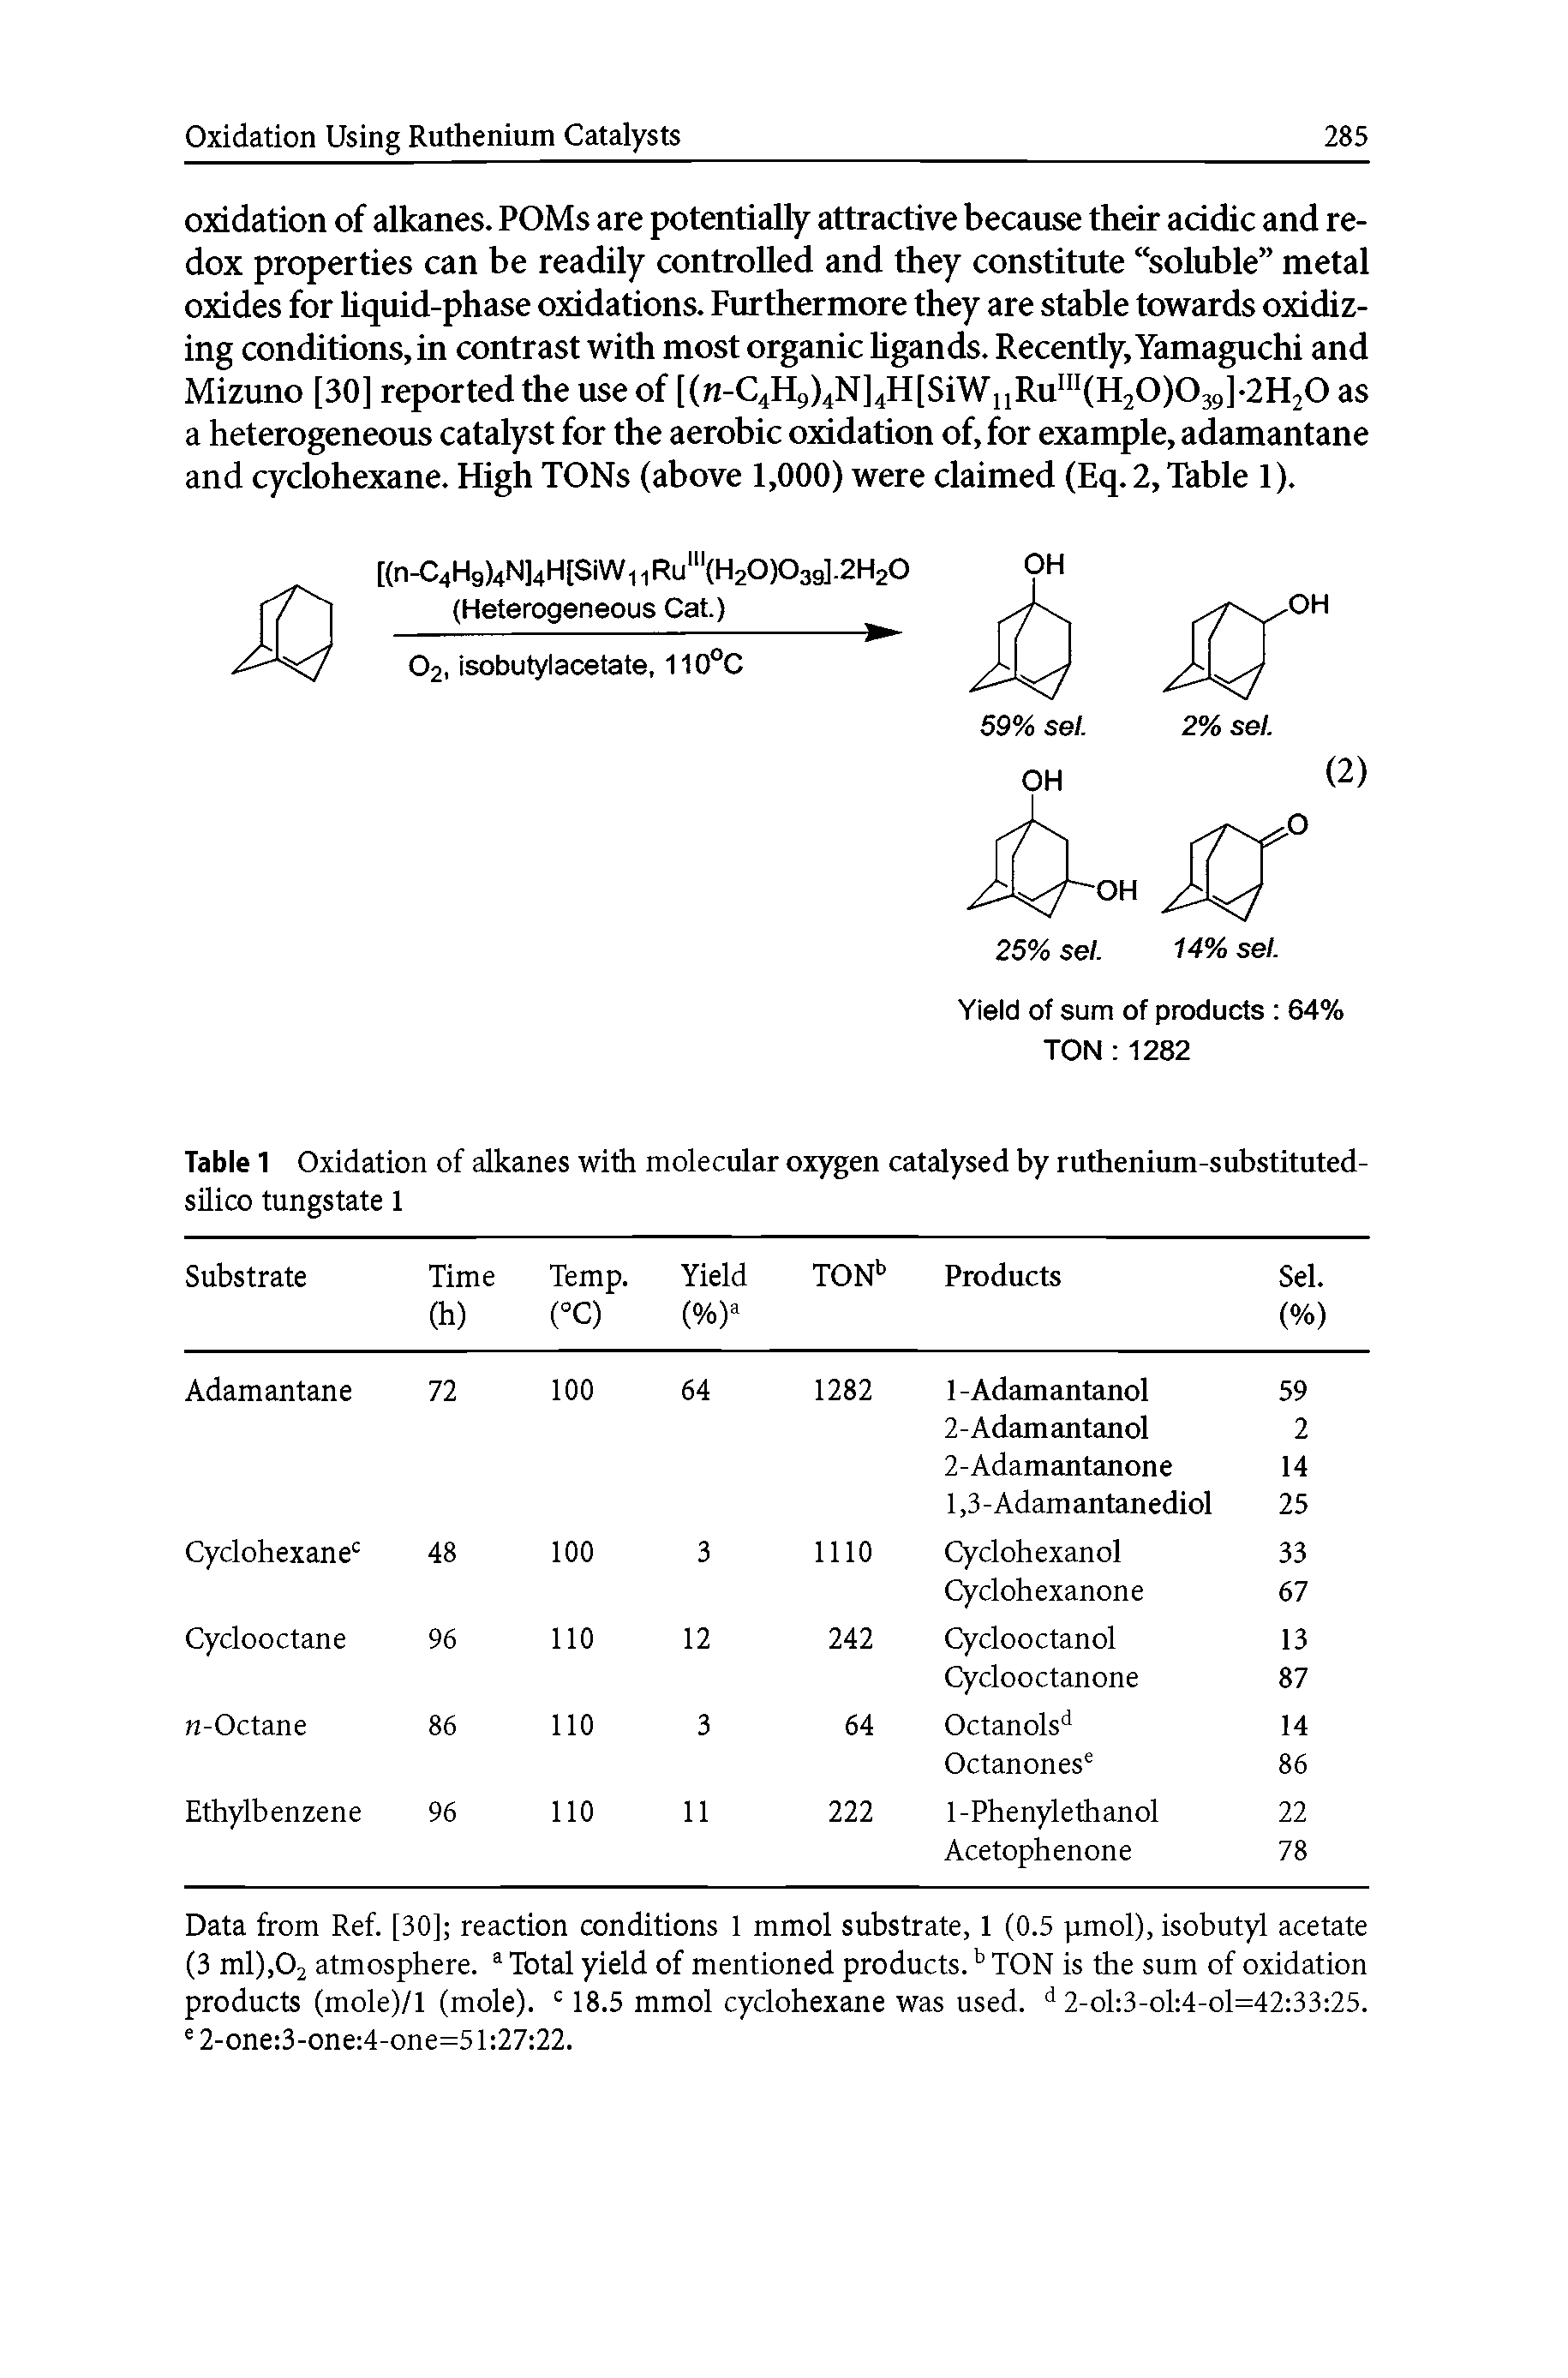 Table 1 Oxidation of alkanes with molecular oxygen catalysed by ruthenium-substituted-silico tungstate 1...